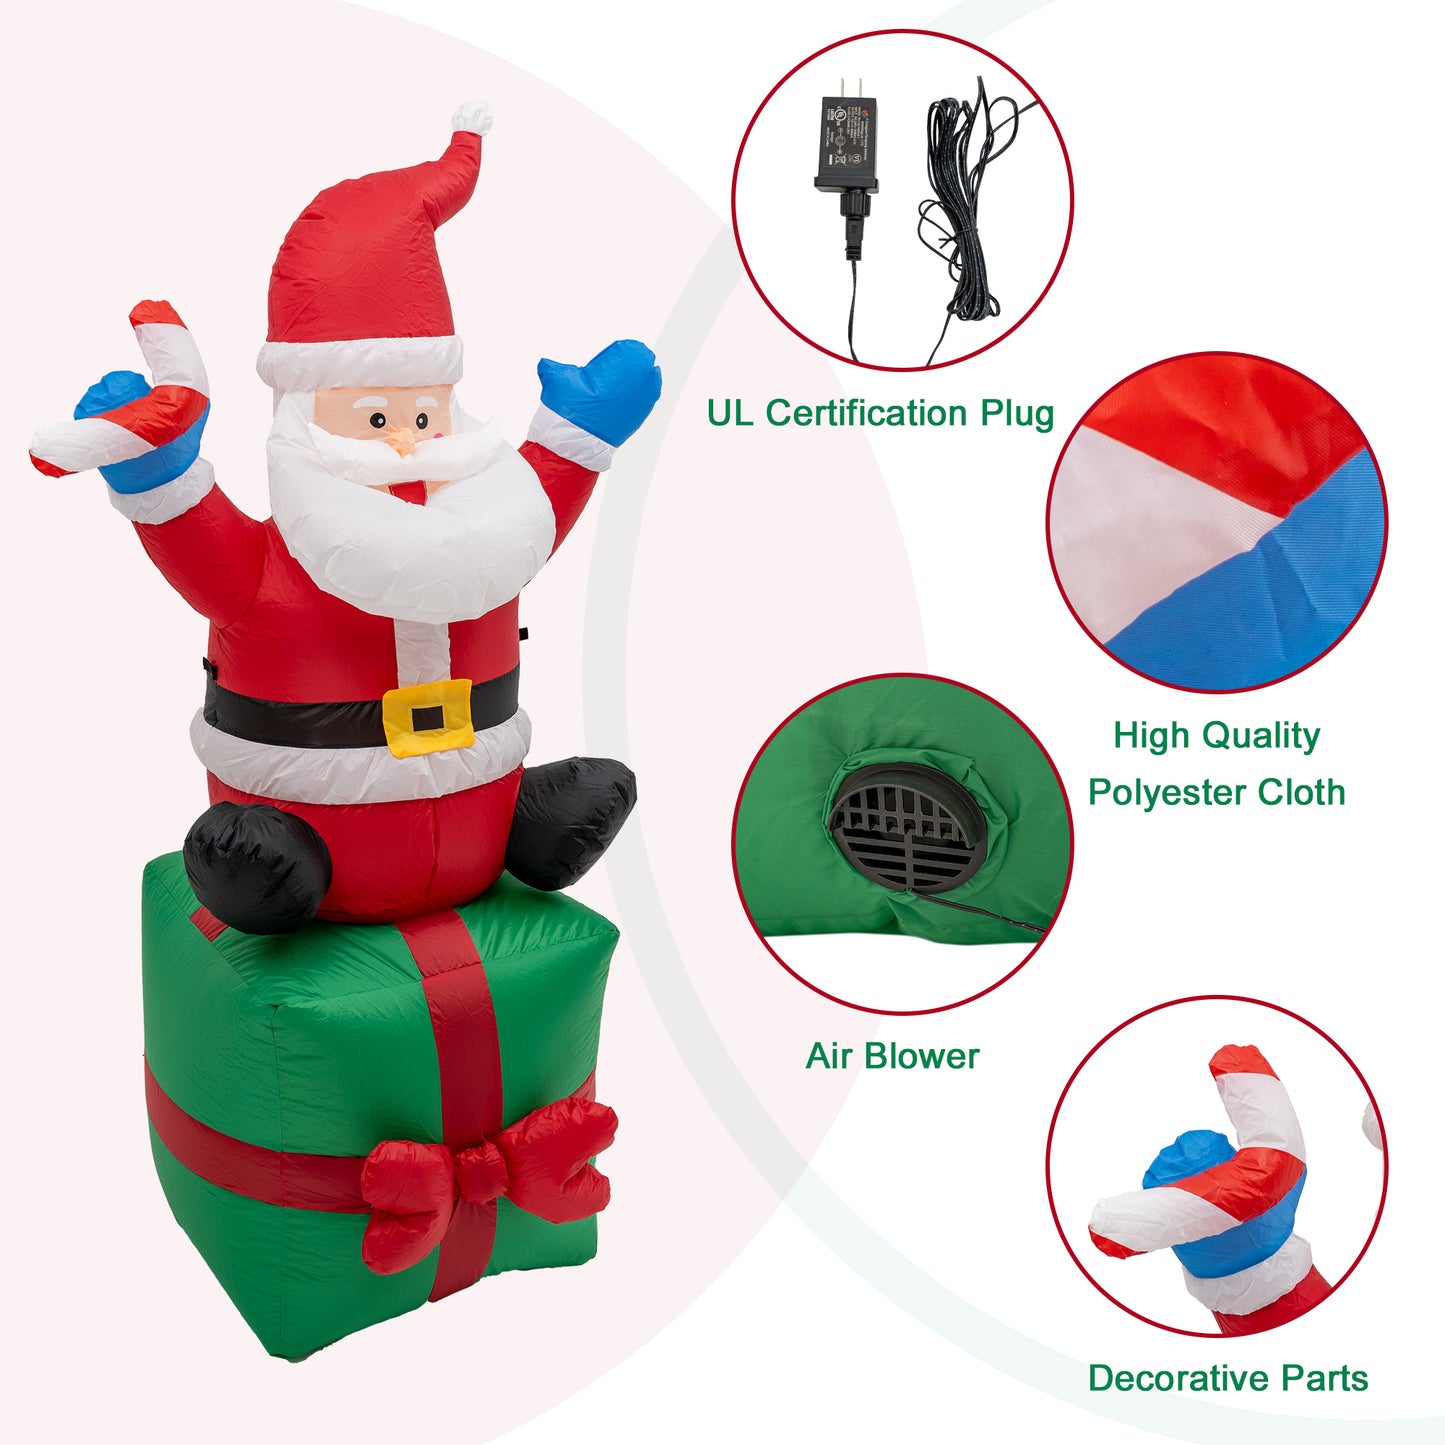 Foot Christmas Inflatable Santa Claus Outdoor Decorations with Build-in LED Lights, Waterproof Xmas Family Inflatable Decor for Yard Lawn Garden Home Party Indoor Outdoor